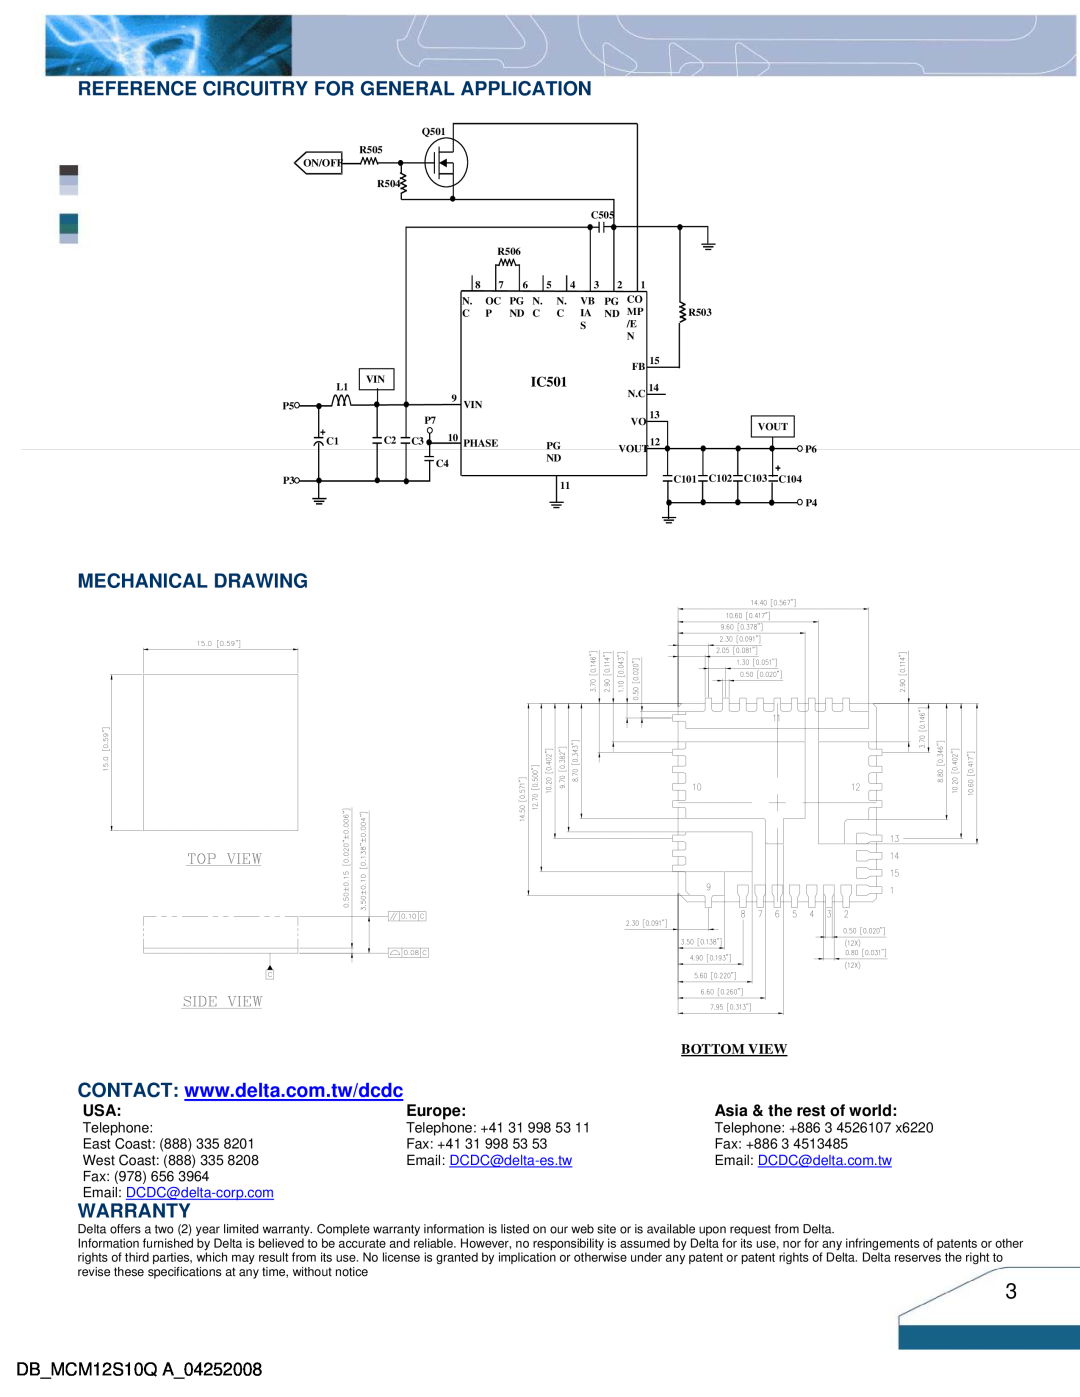 Delta Electronics 4.5V~ 5.5V Reference Circuitry For General Application, Mechanical Drawing, Warranty, Bottom View, IC501 